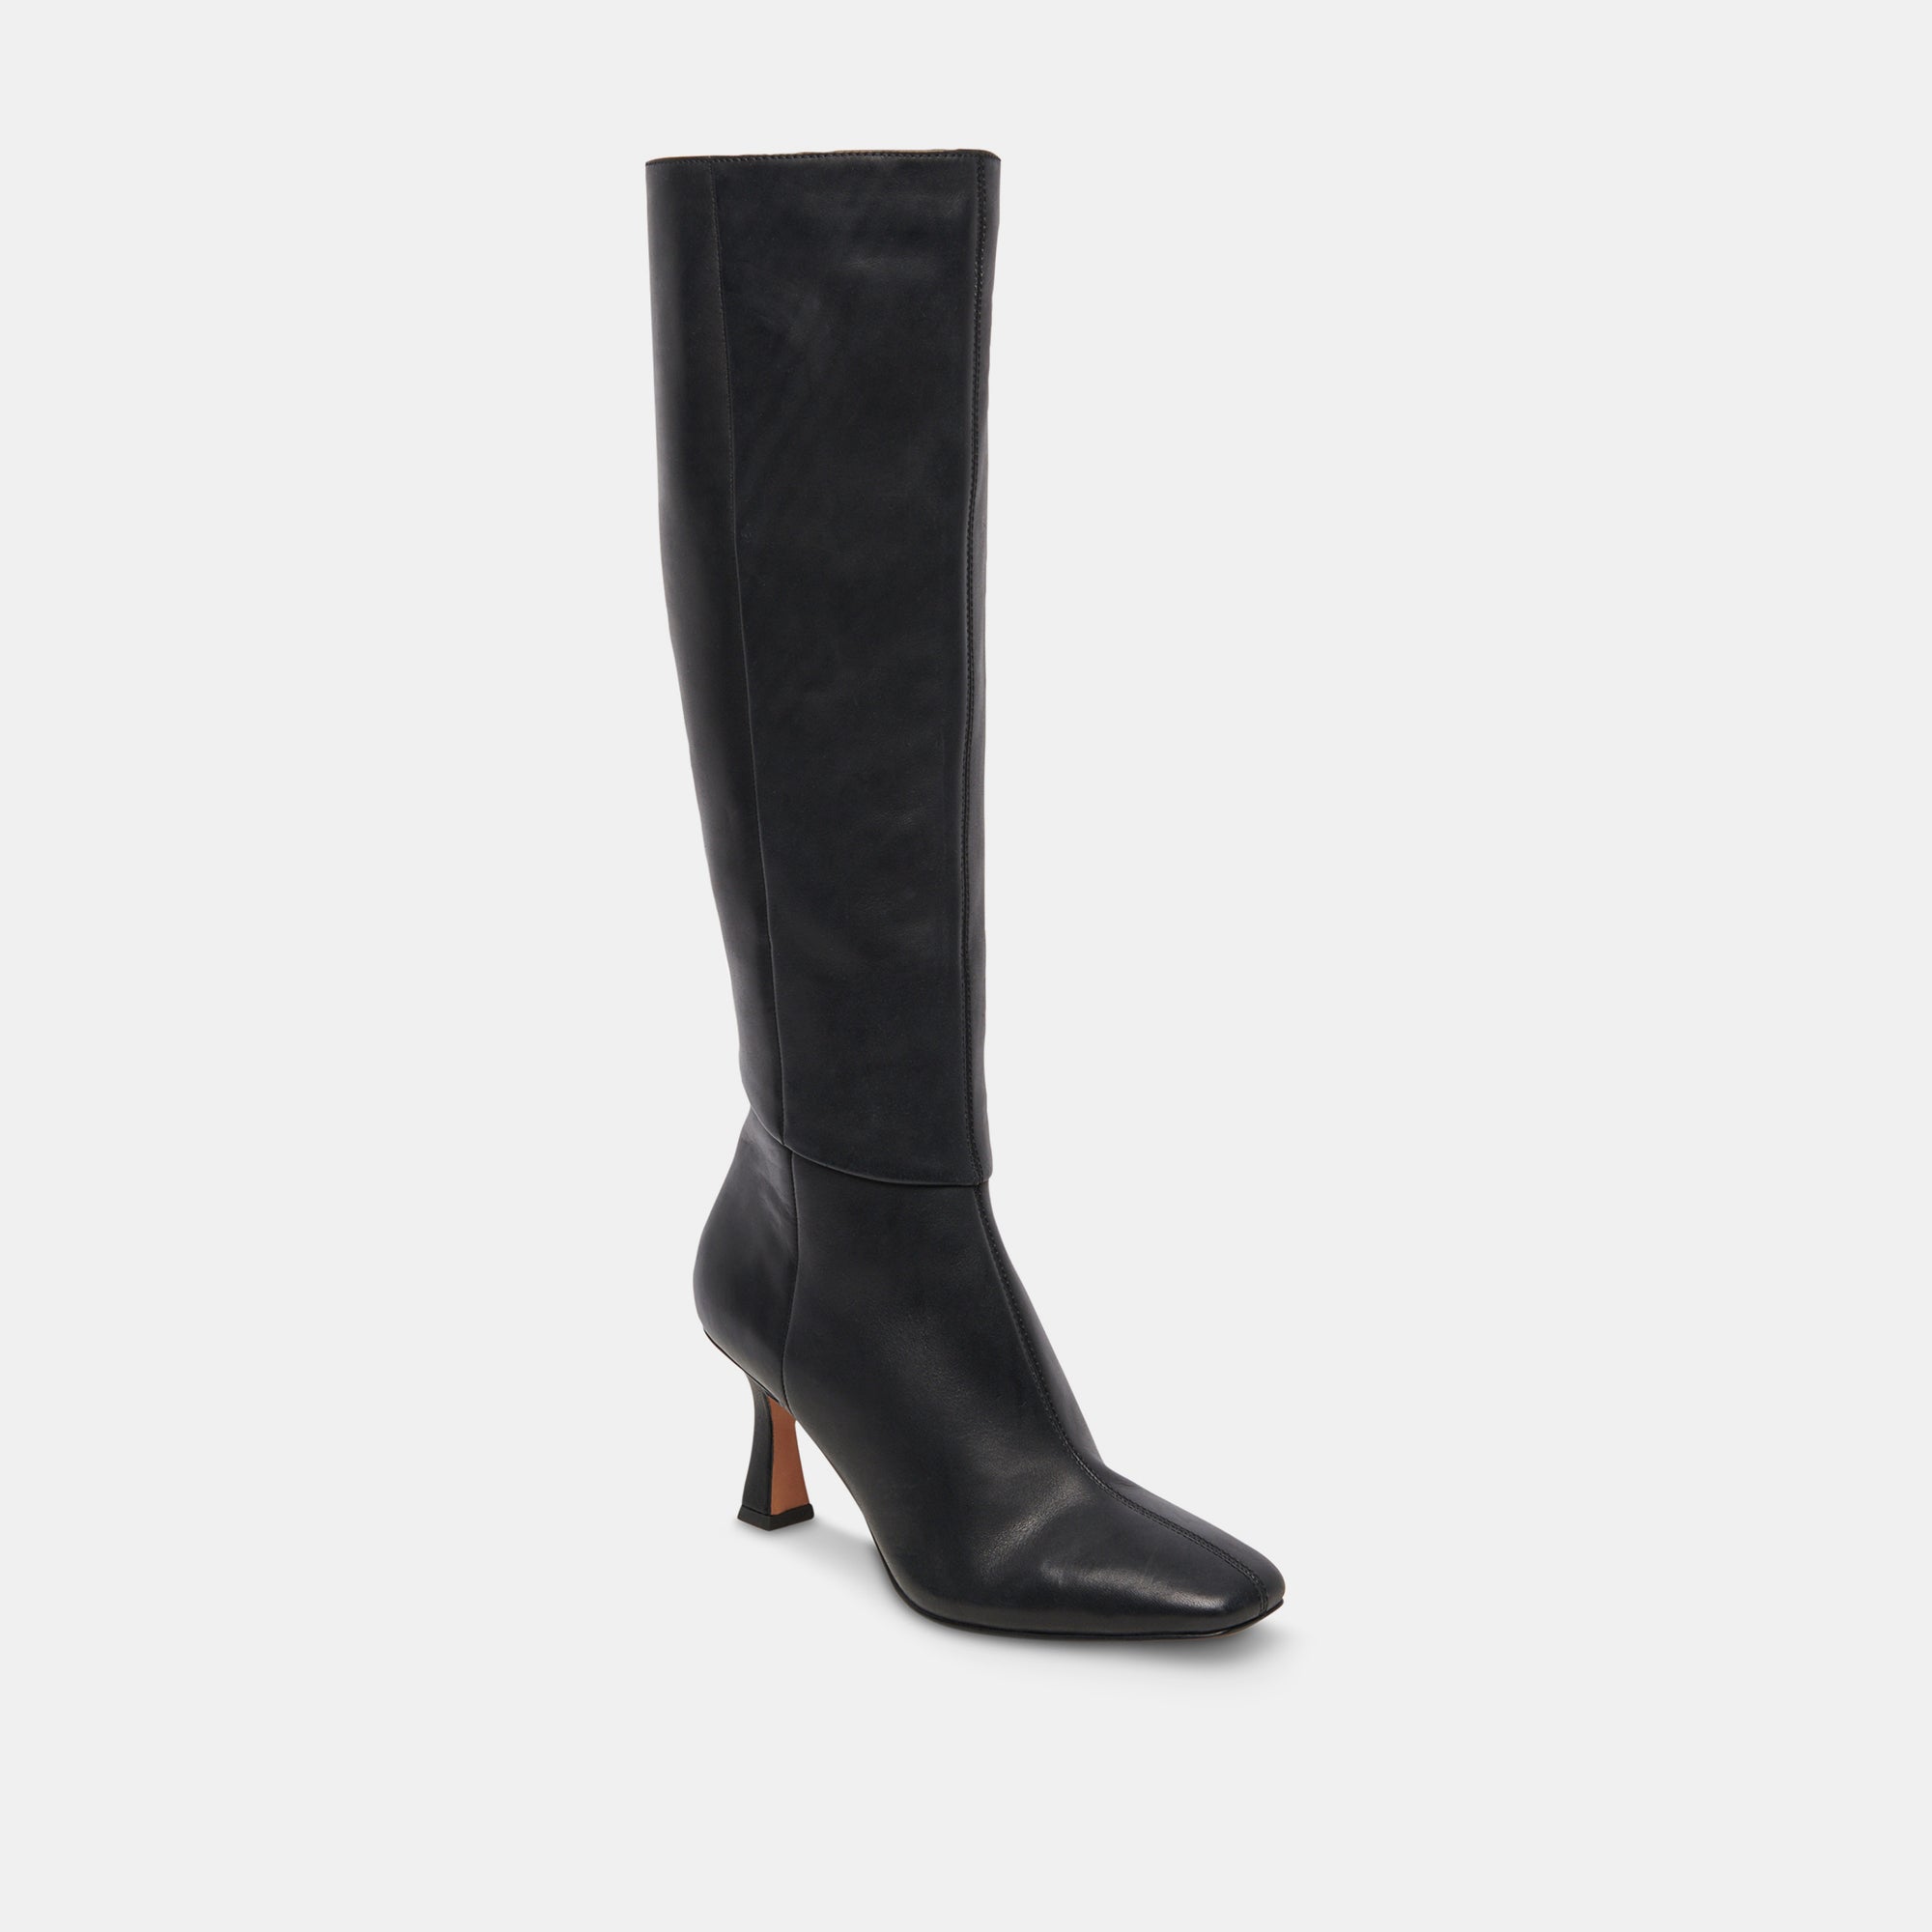 GYRA WIDE CALF BOOTS BLACK LEATHER – Dolce Vita